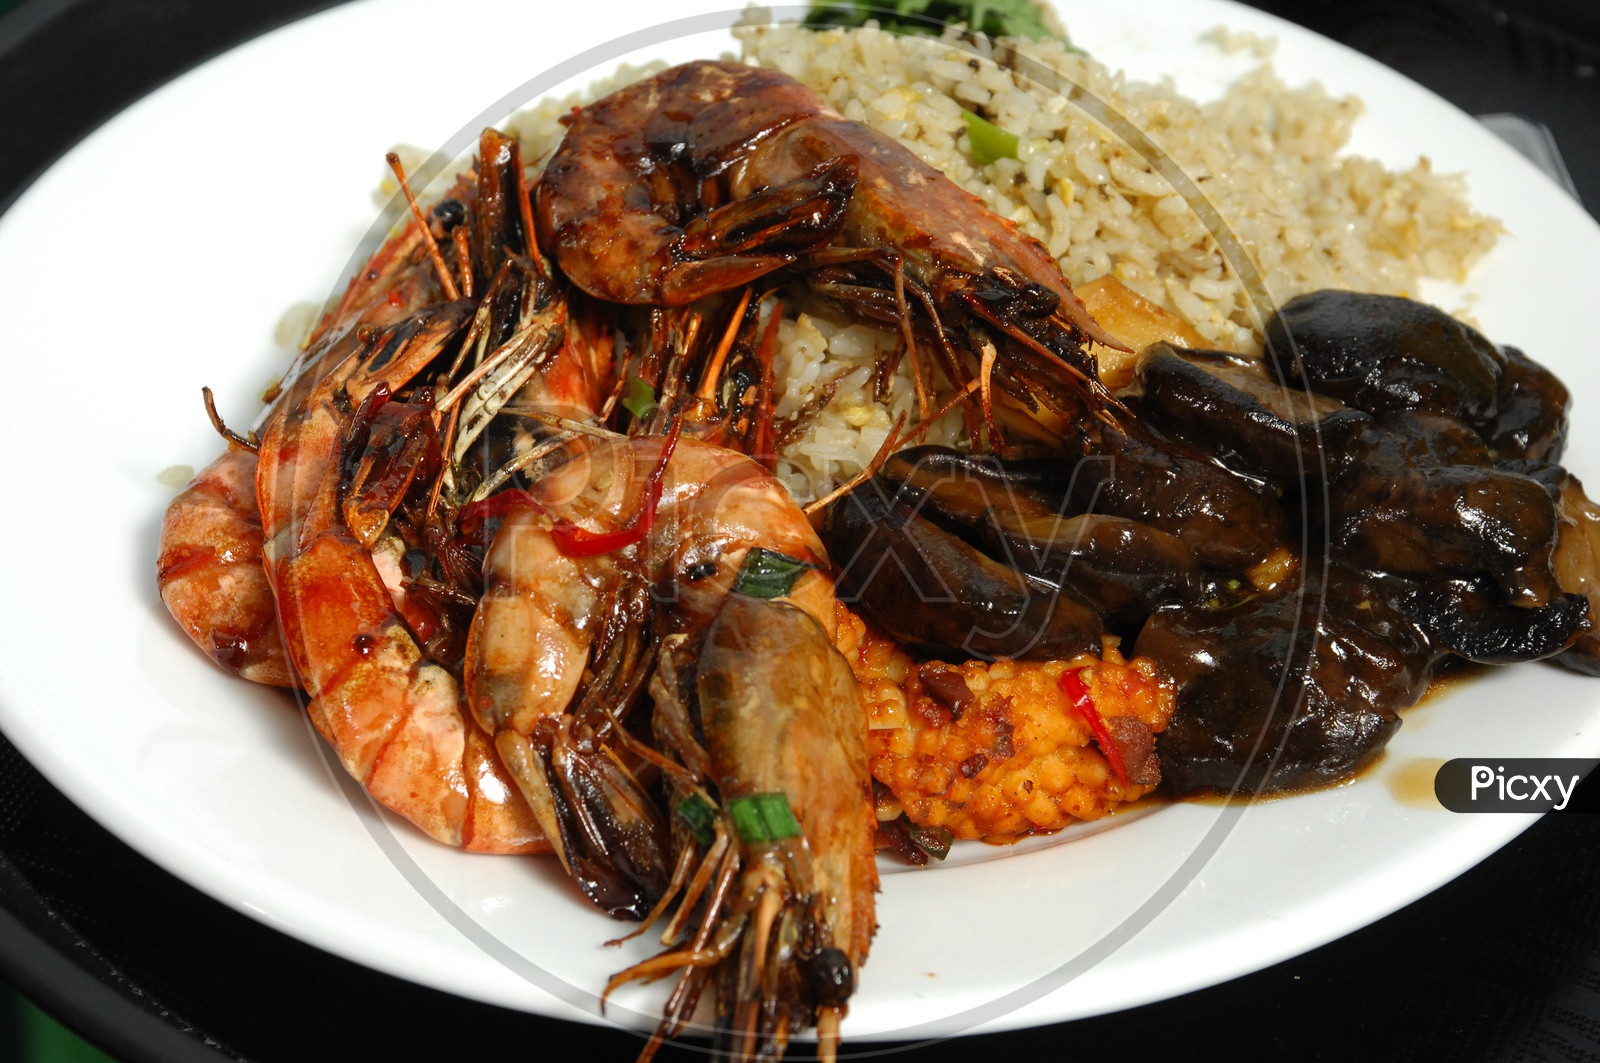 Cooked shrimp along with fried rice served in a white plate